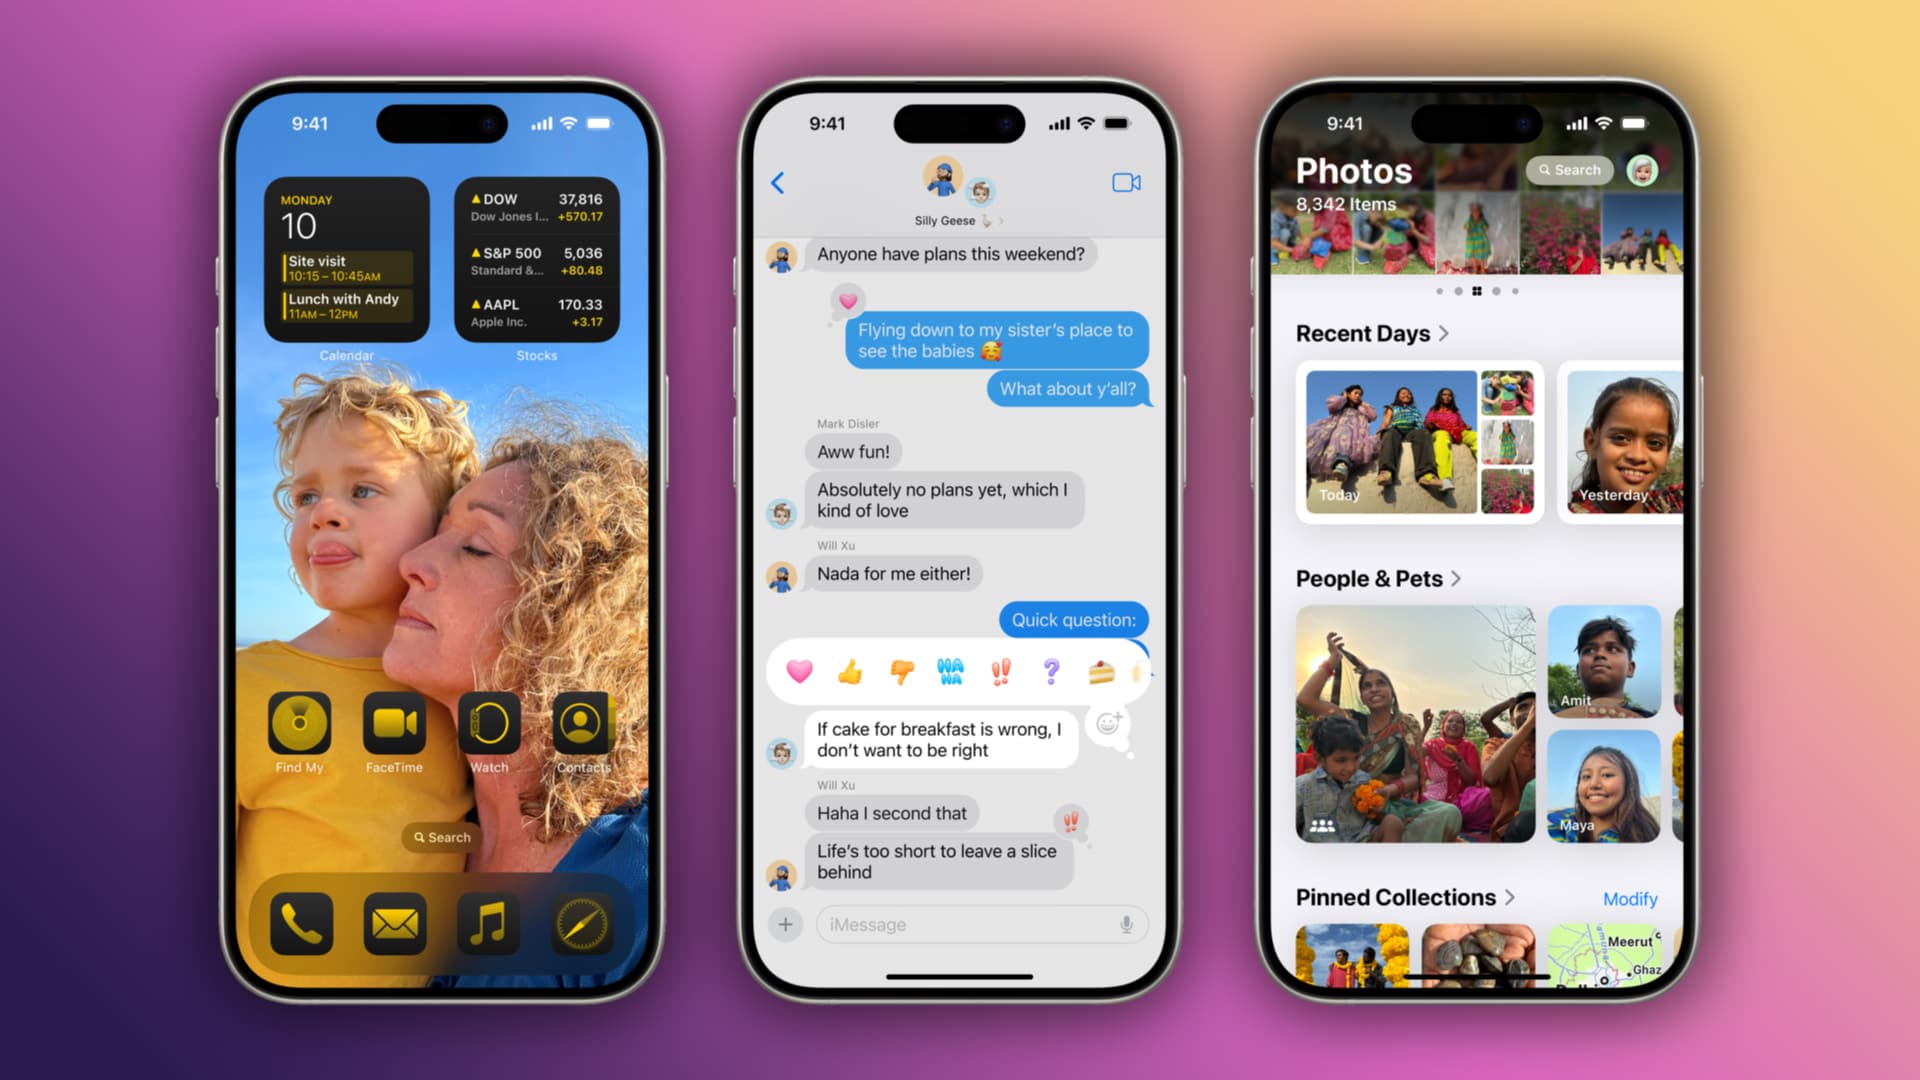 Three iPhone screenshots showcasing iOS 18's home screen and AI features in the Messages and Photos apps, set against a colorful gradient background